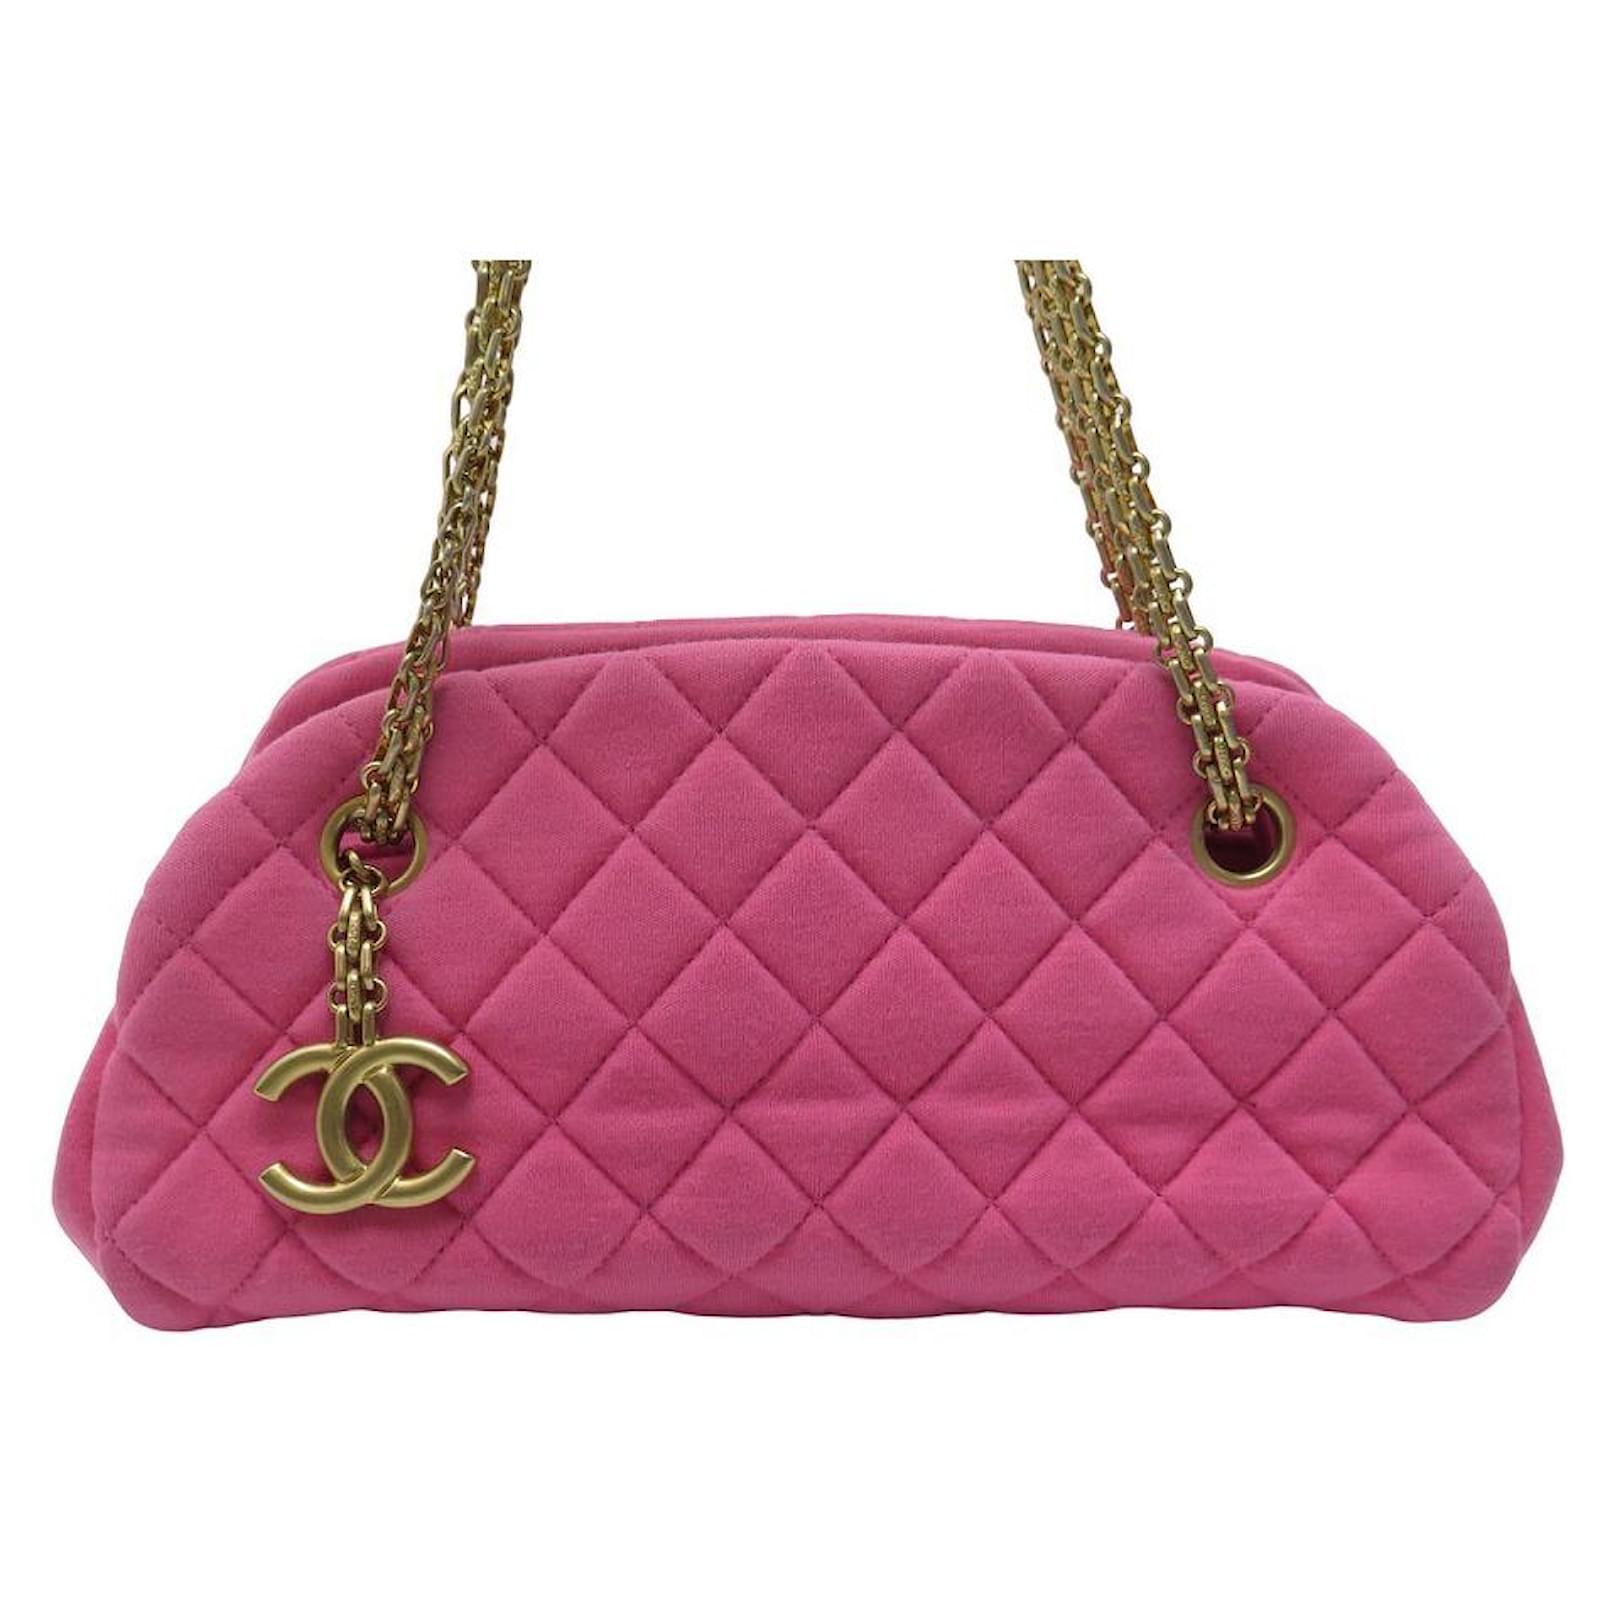 CHANEL BOWLING MADEMOISELLE MATELASSE PINK CANVAS HAND BAG Cloth